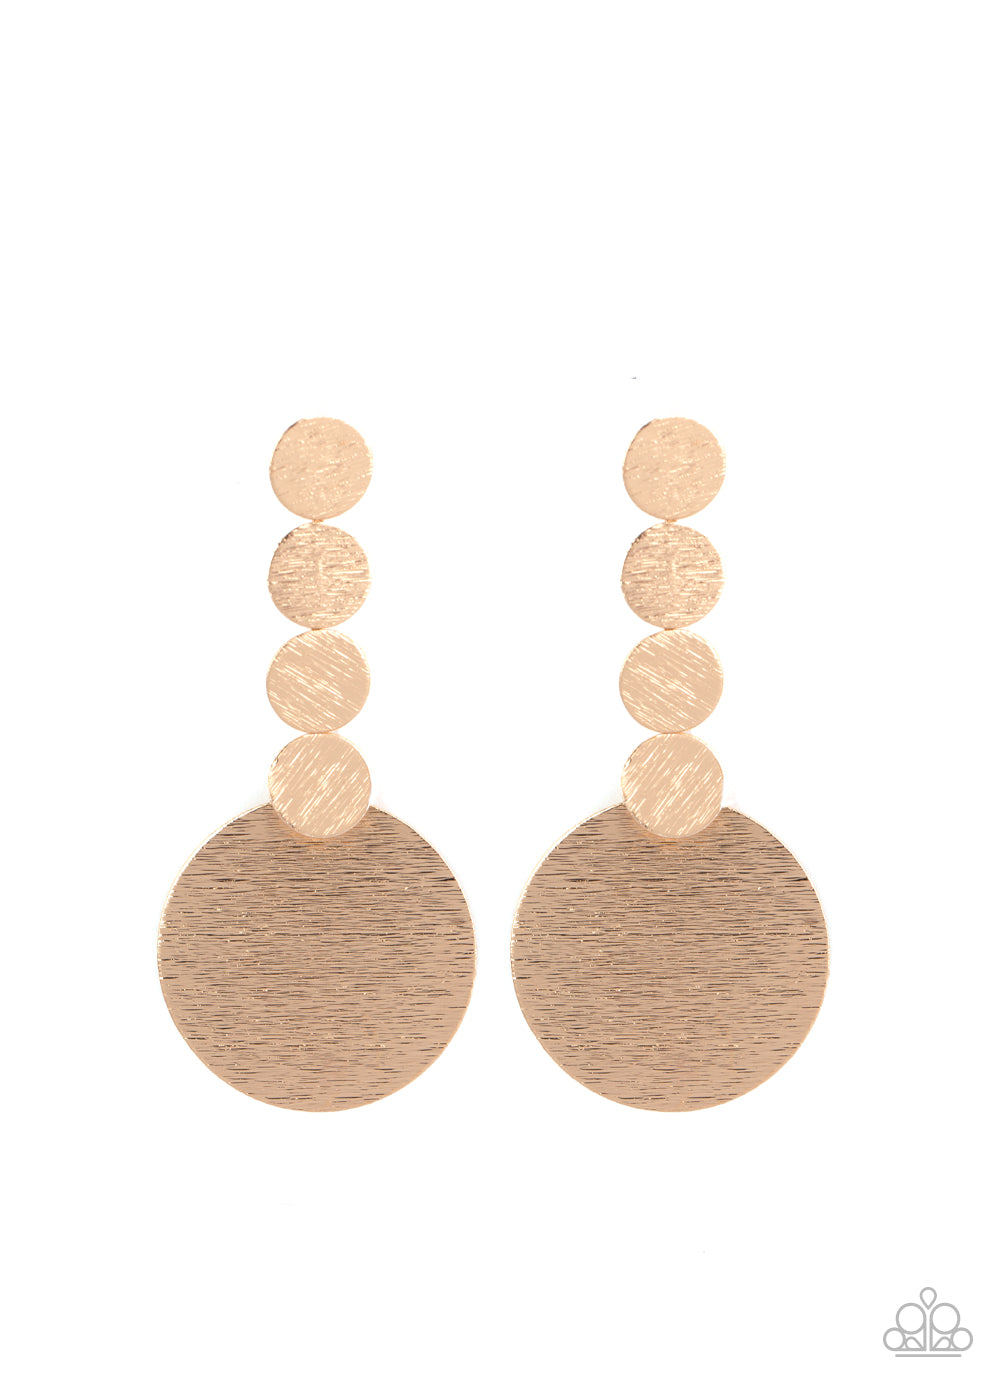 Paparazzi Accessories Idolized Illumination - Gold Earrings - Lady T Accessories